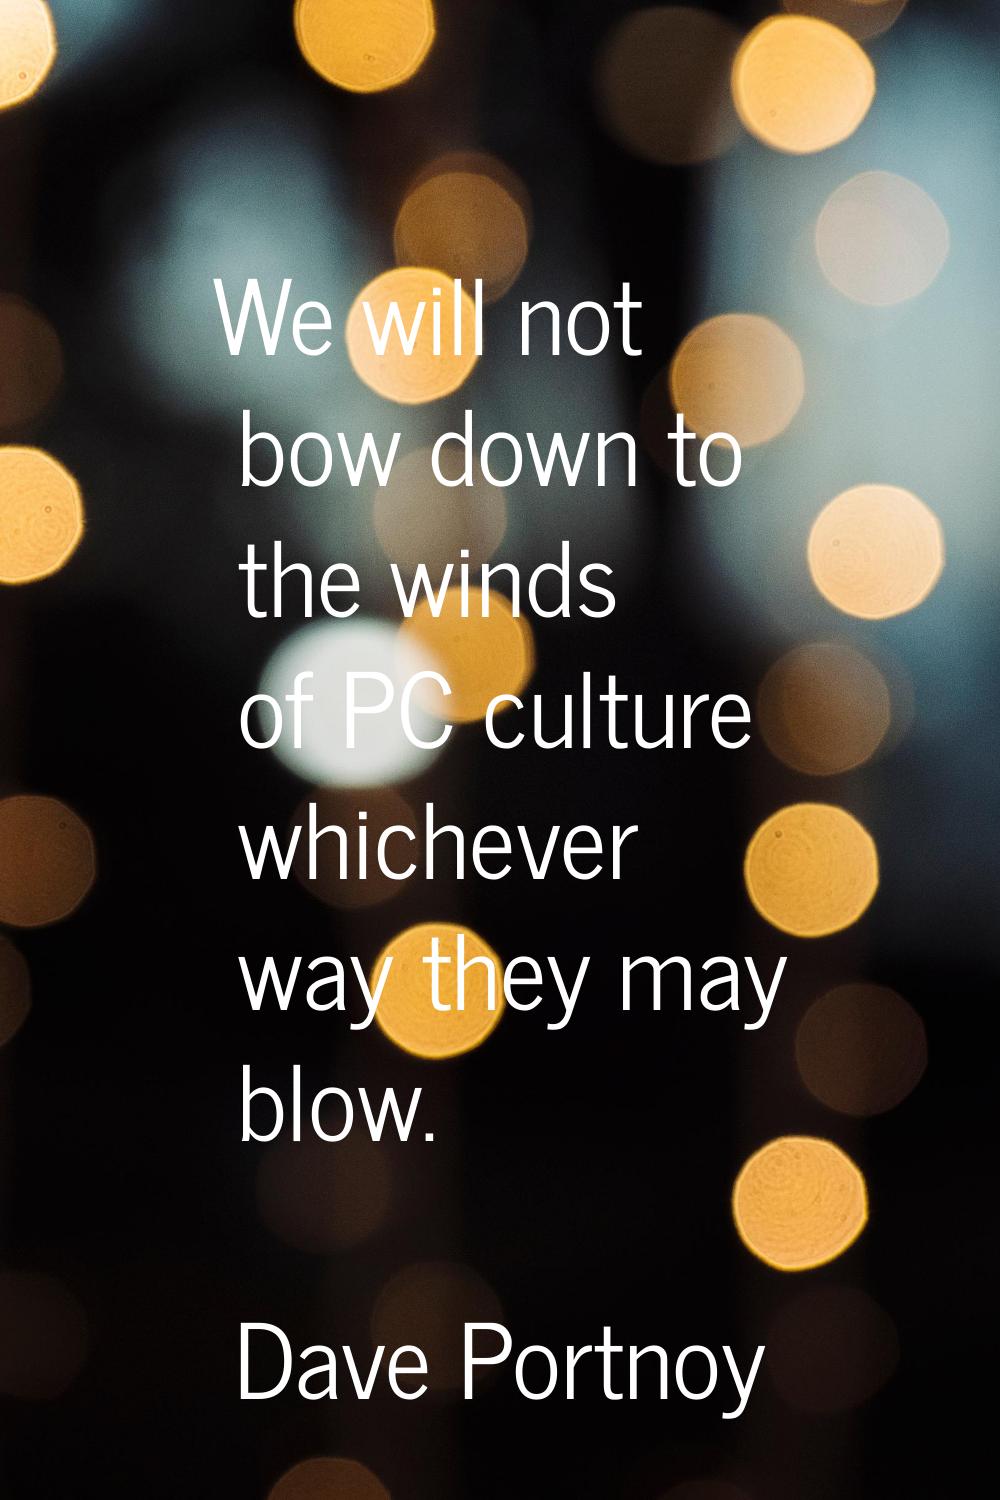 We will not bow down to the winds of PC culture whichever way they may blow.